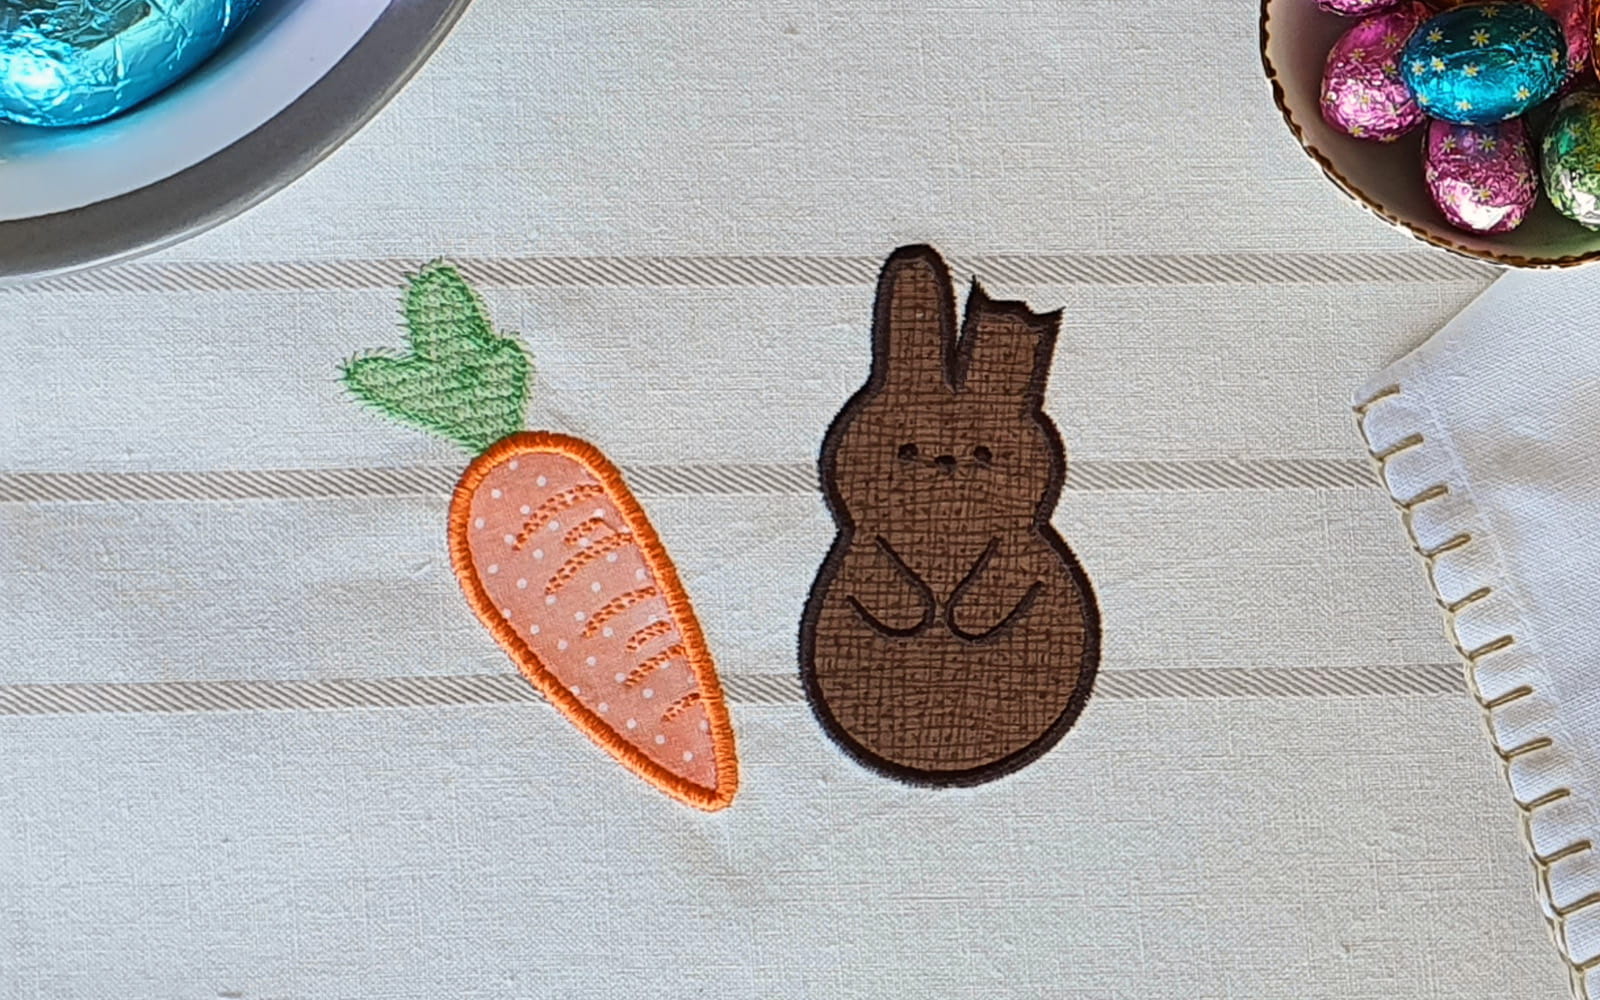 Orange carrot and brown bunny embroidered on placemat